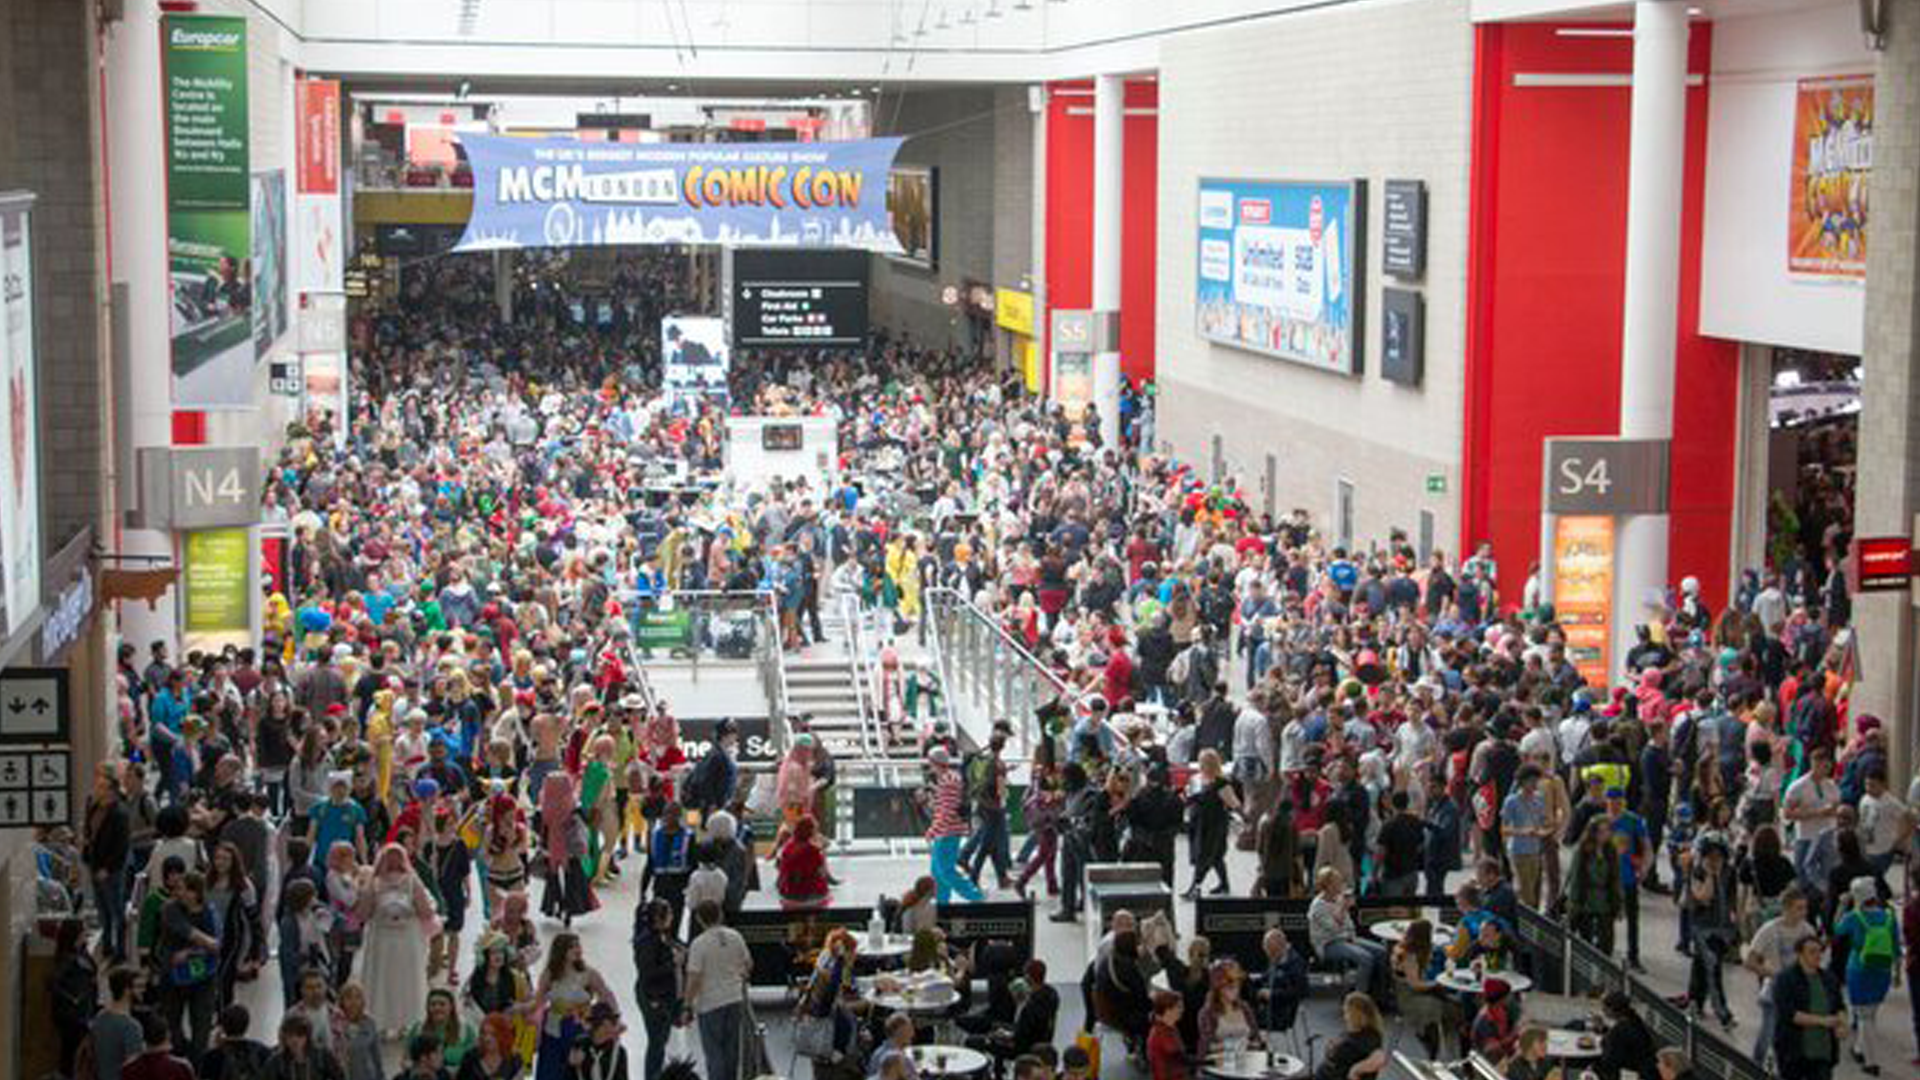 An image of the crowd at MCM London Comic Con.